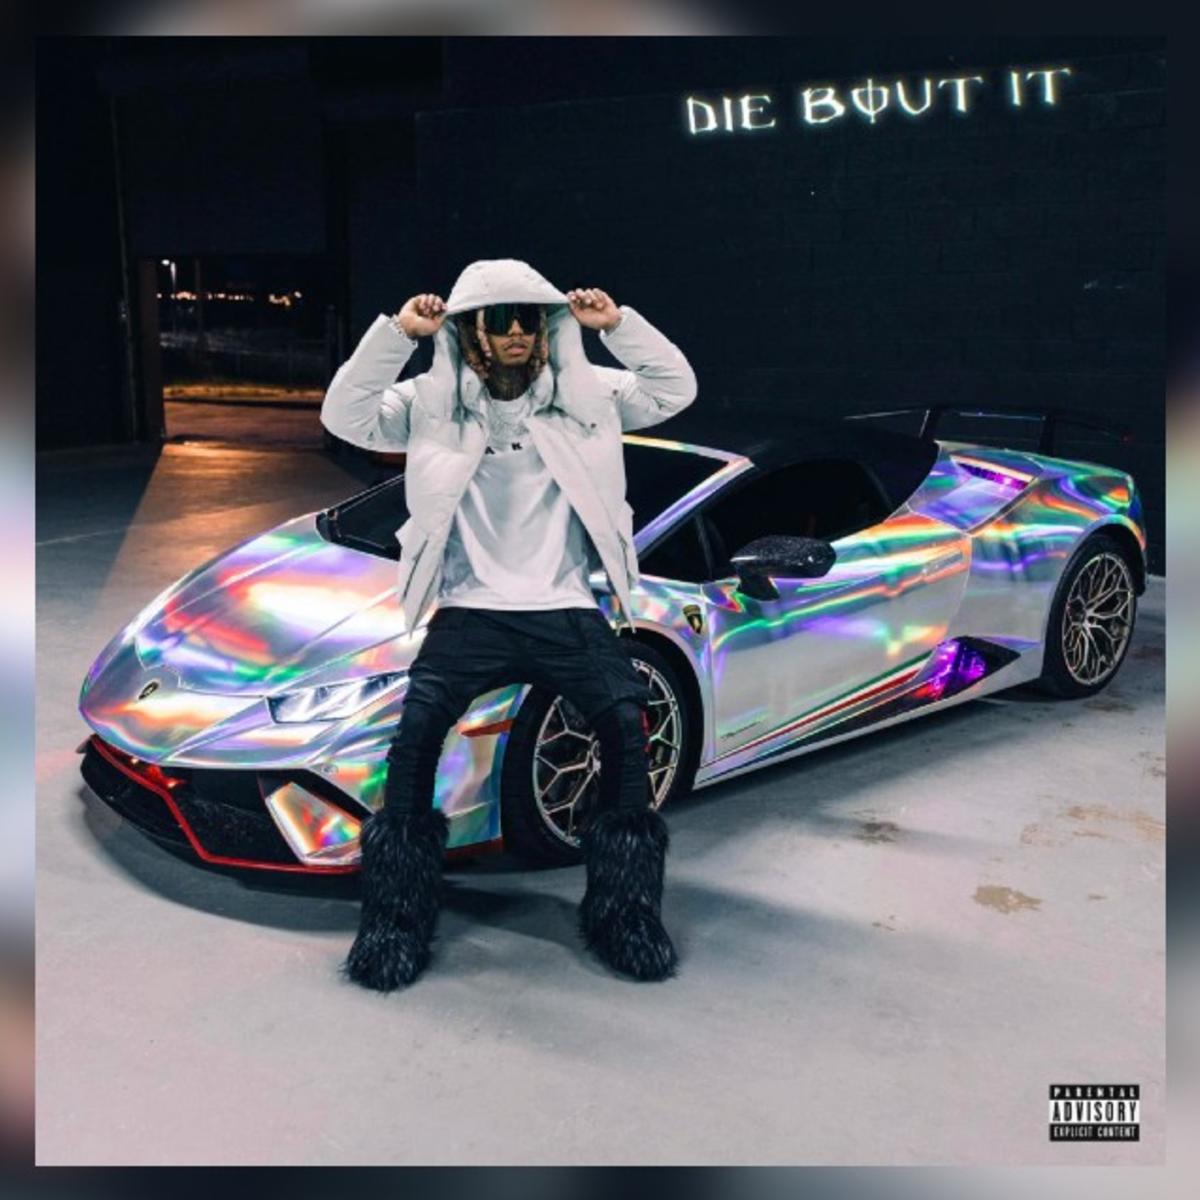 Listen To “Die Bout It” By Lil Gnar